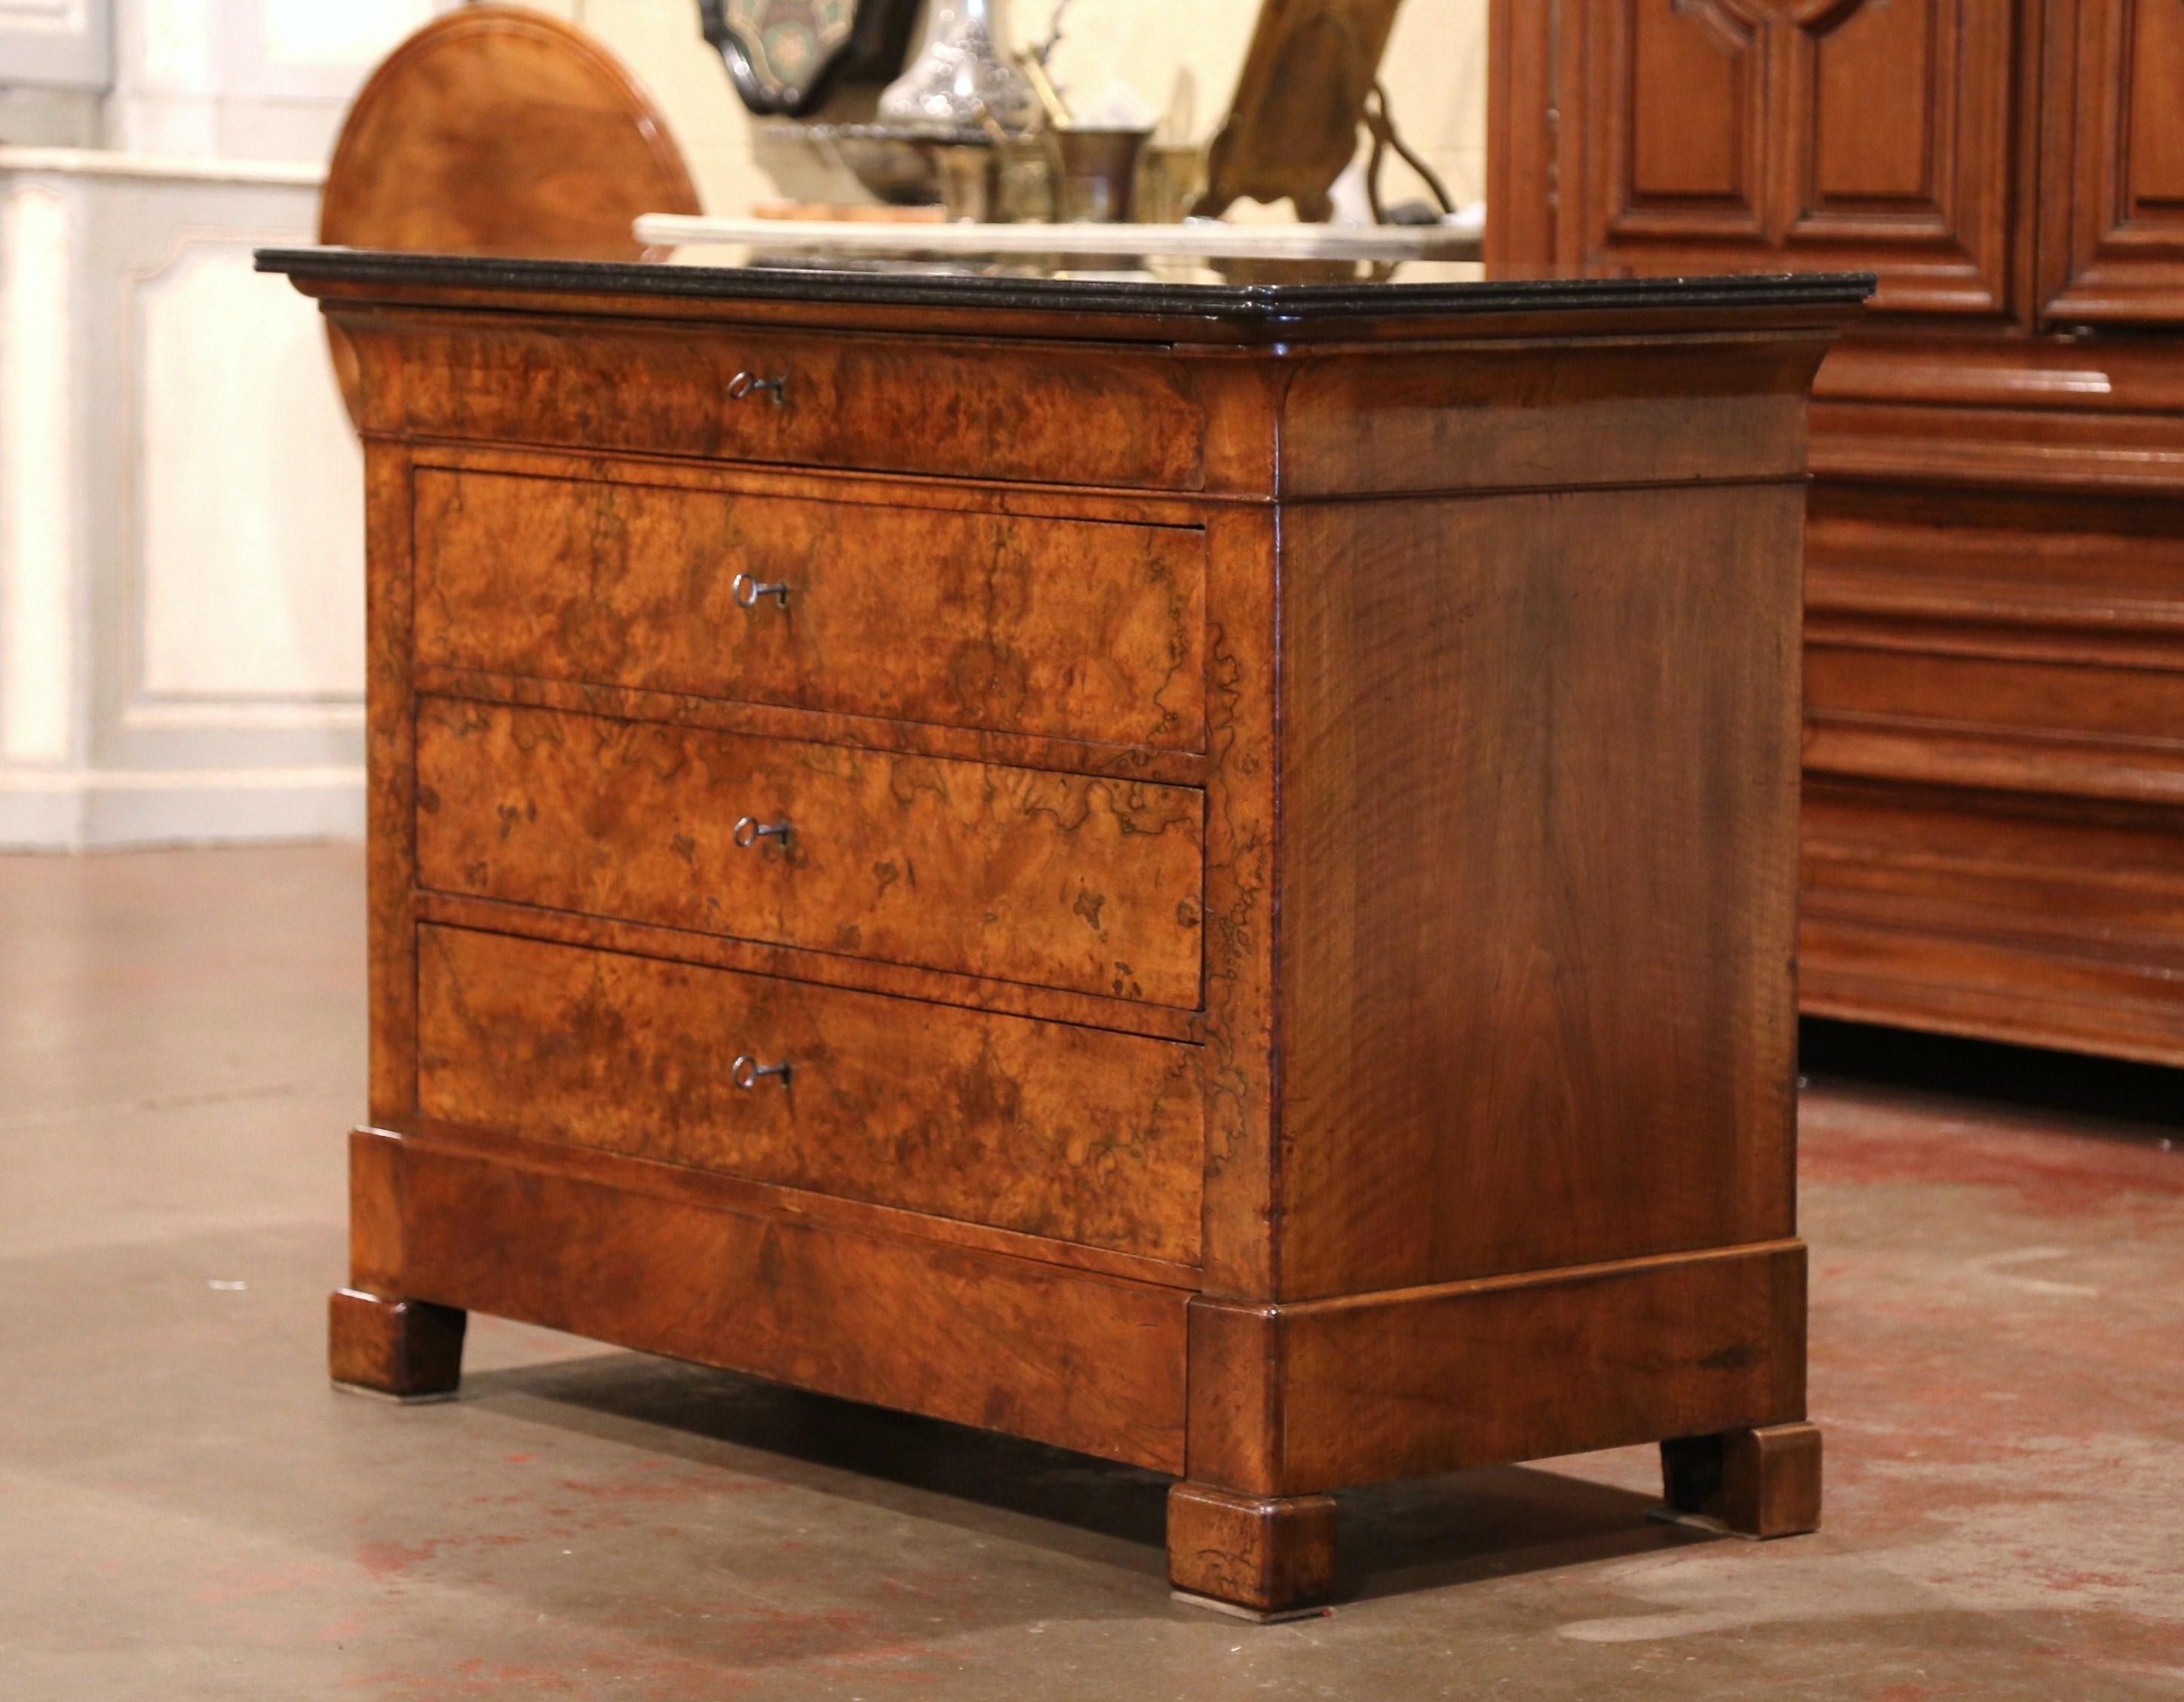 This elegant, antique fruitwood chest of drawers was crafted in France, circa 1860. The traditional commode with simple lines stands on four square feet over a thick and raised base plinth; the cabinet features five long drawers across the front